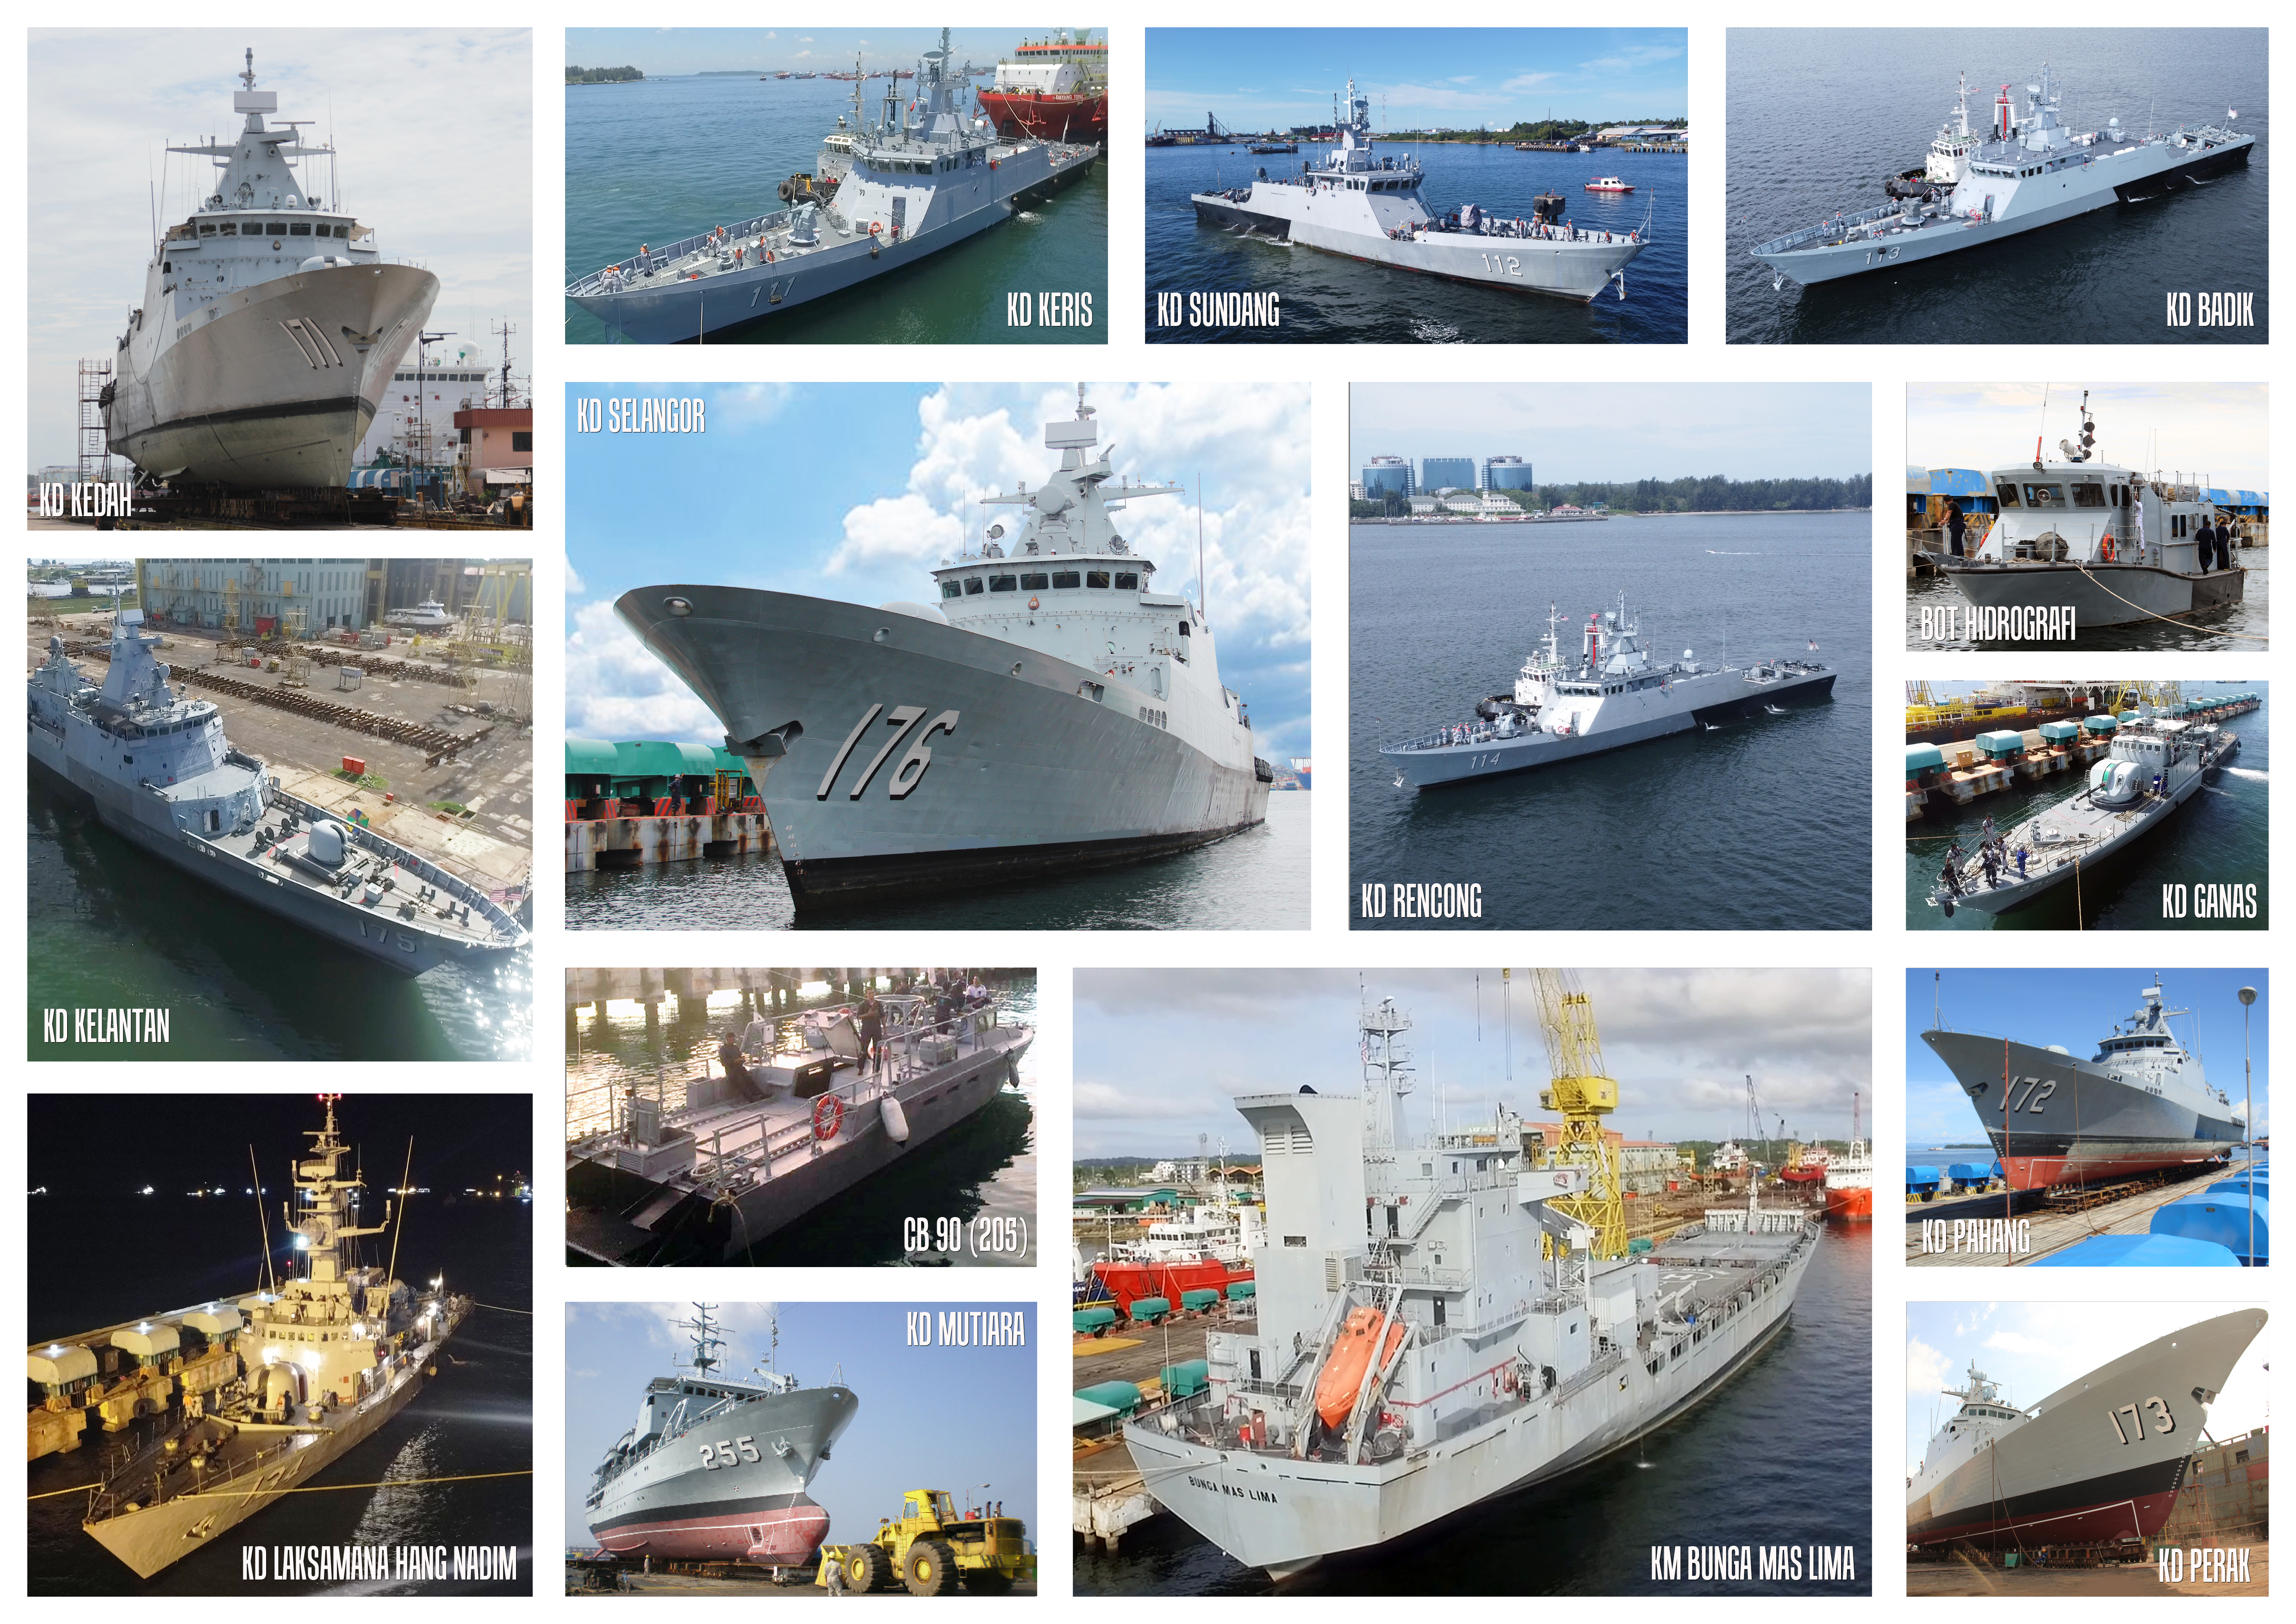 LSE also Services & Maintains Naval Vessels